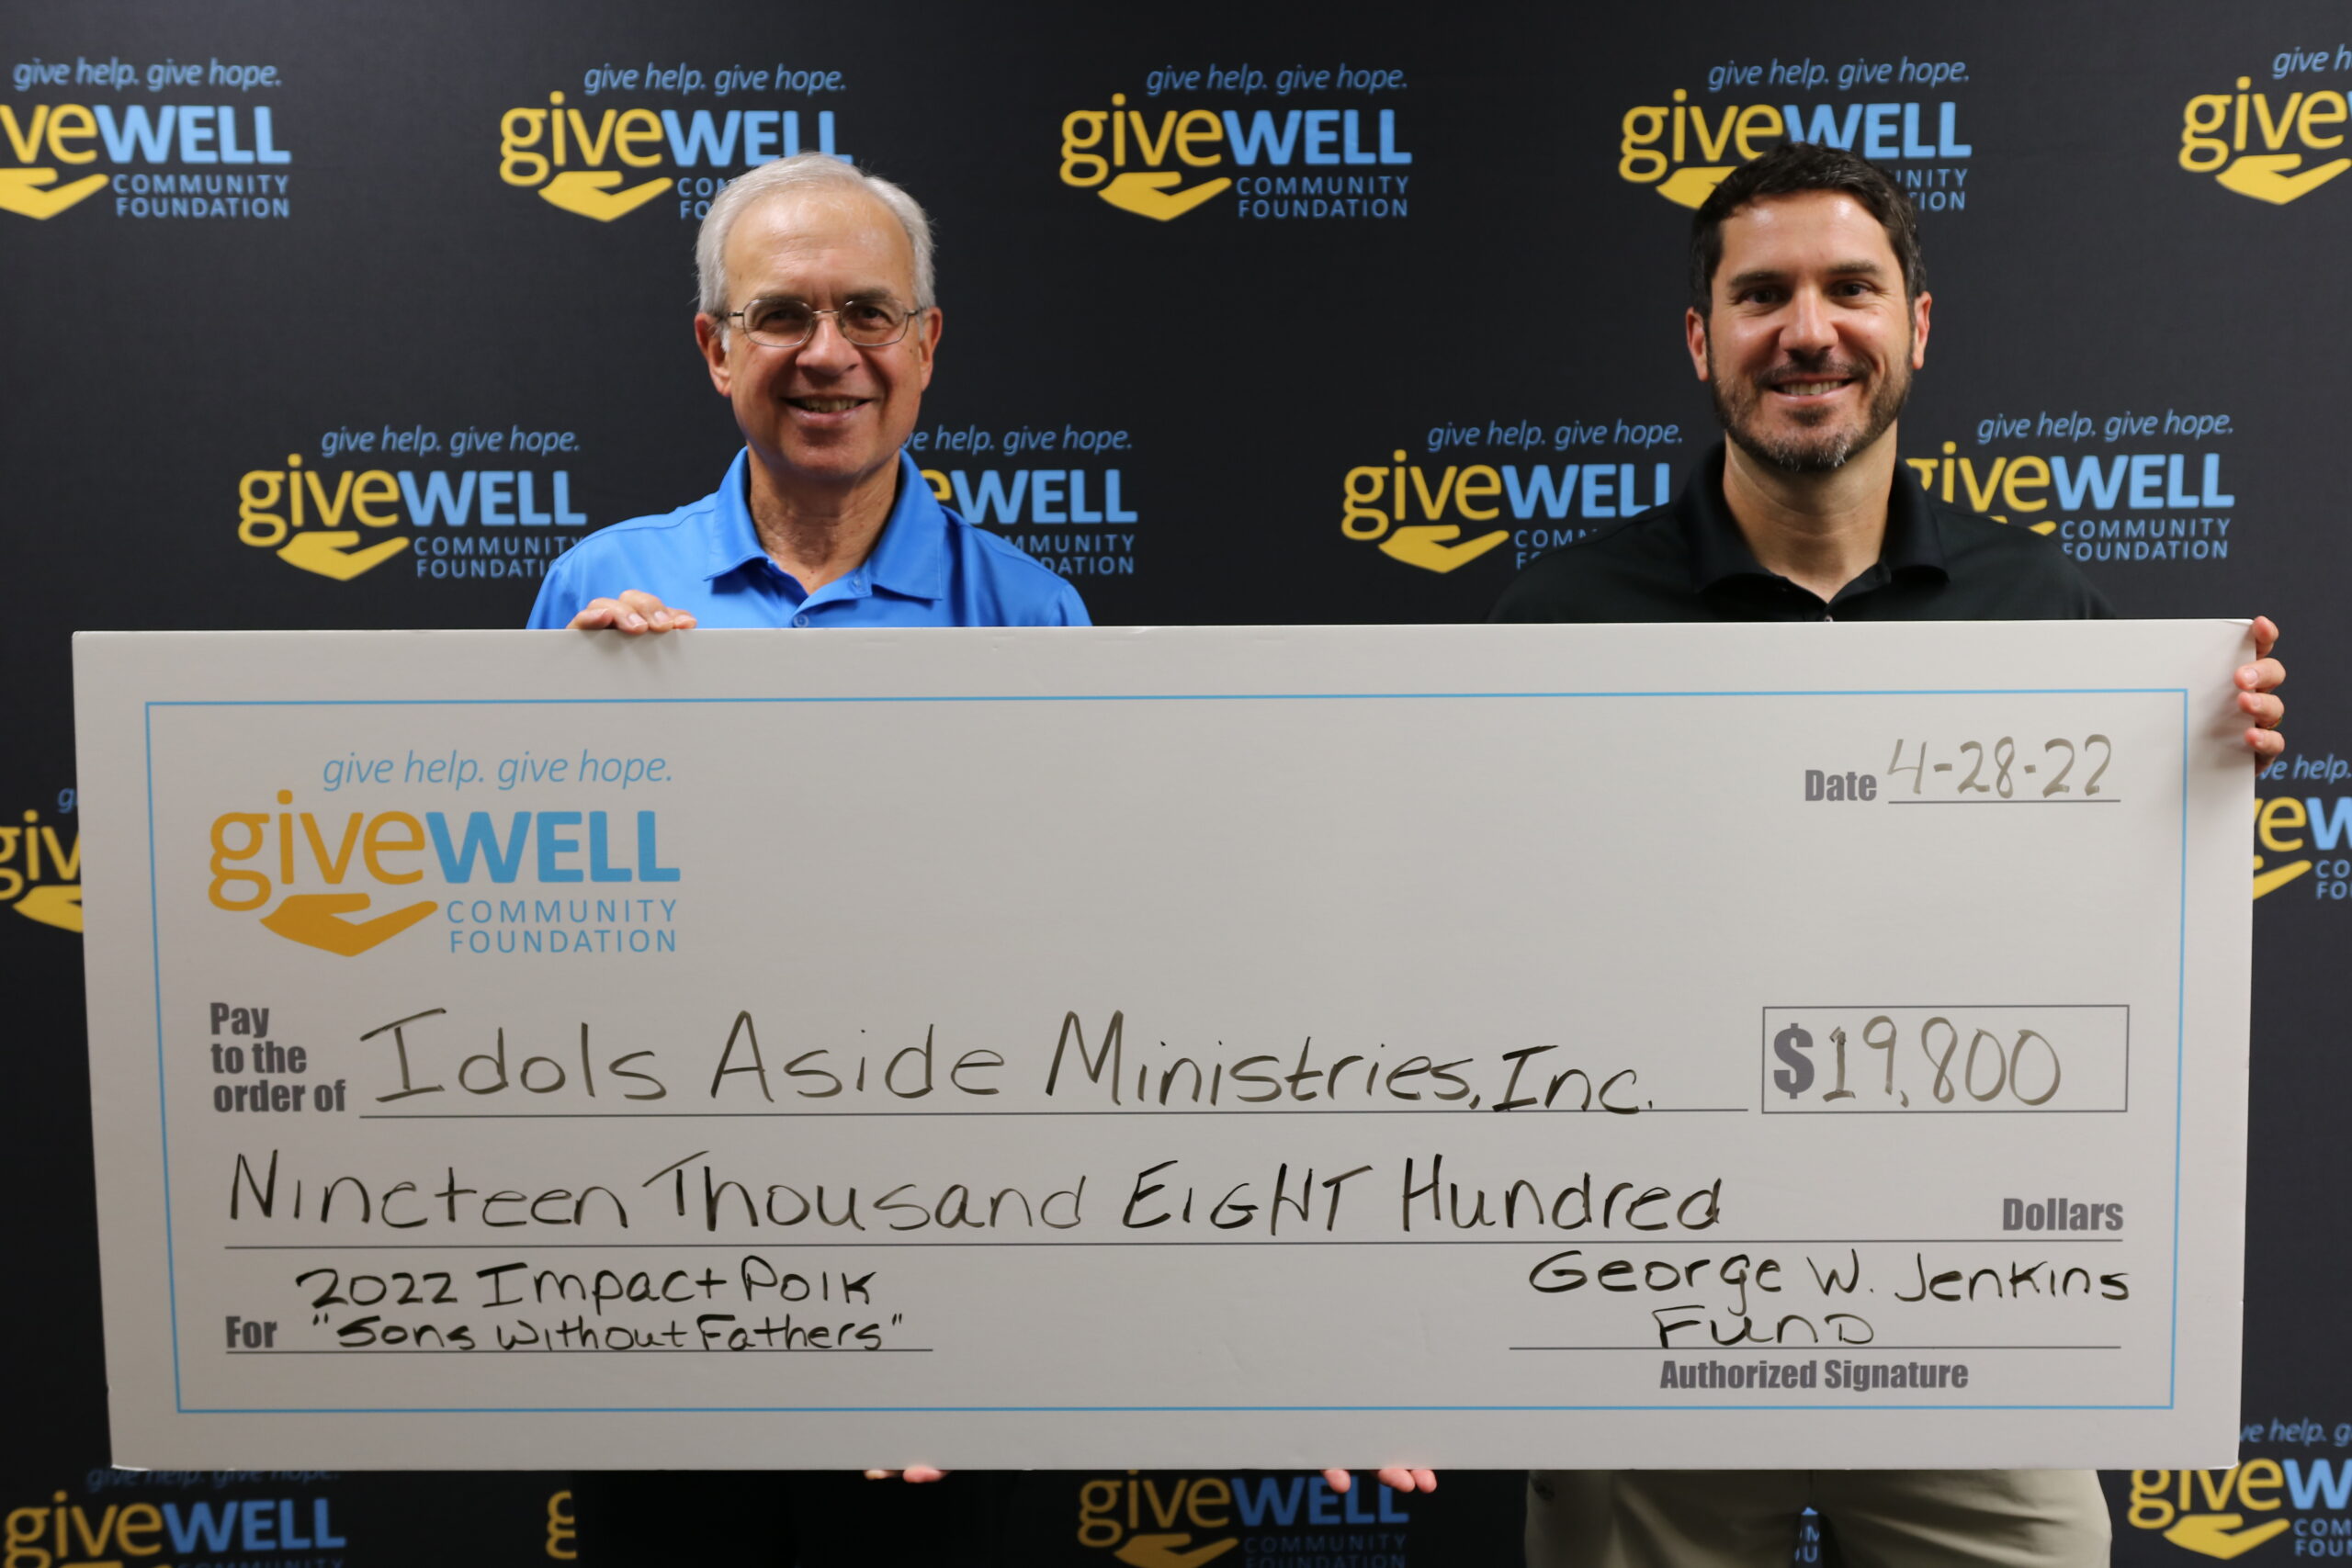 Photo of check presentation to Idols Aside Ministries